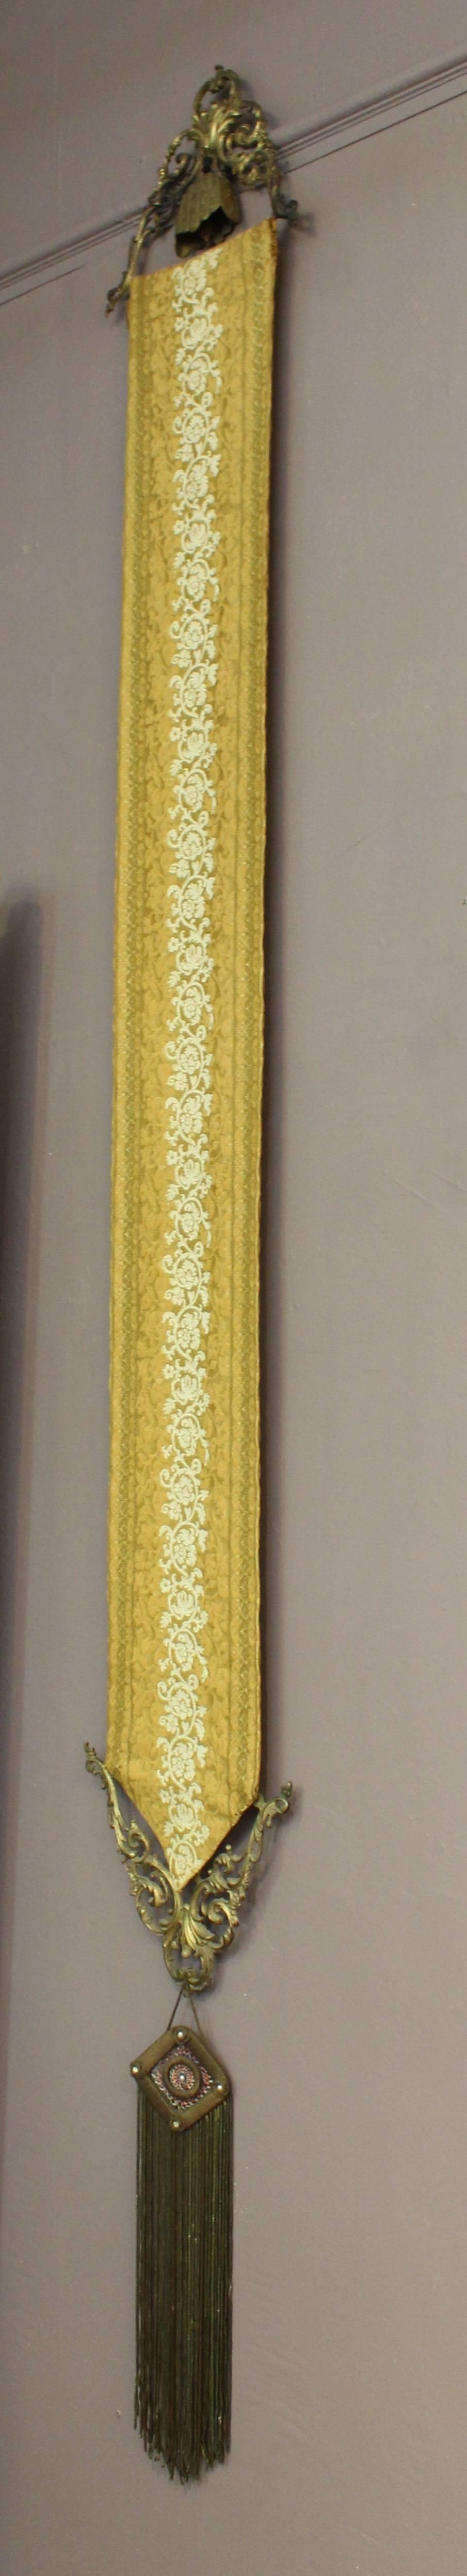 Late nineteenth century brass bell pull with newly upholstered yellow fabric in a scrolling floral pattern. The metalwork at each end is in brass and features a scrolling foliate motif. The bottom of the pull has a decorative woven metallic tassel.